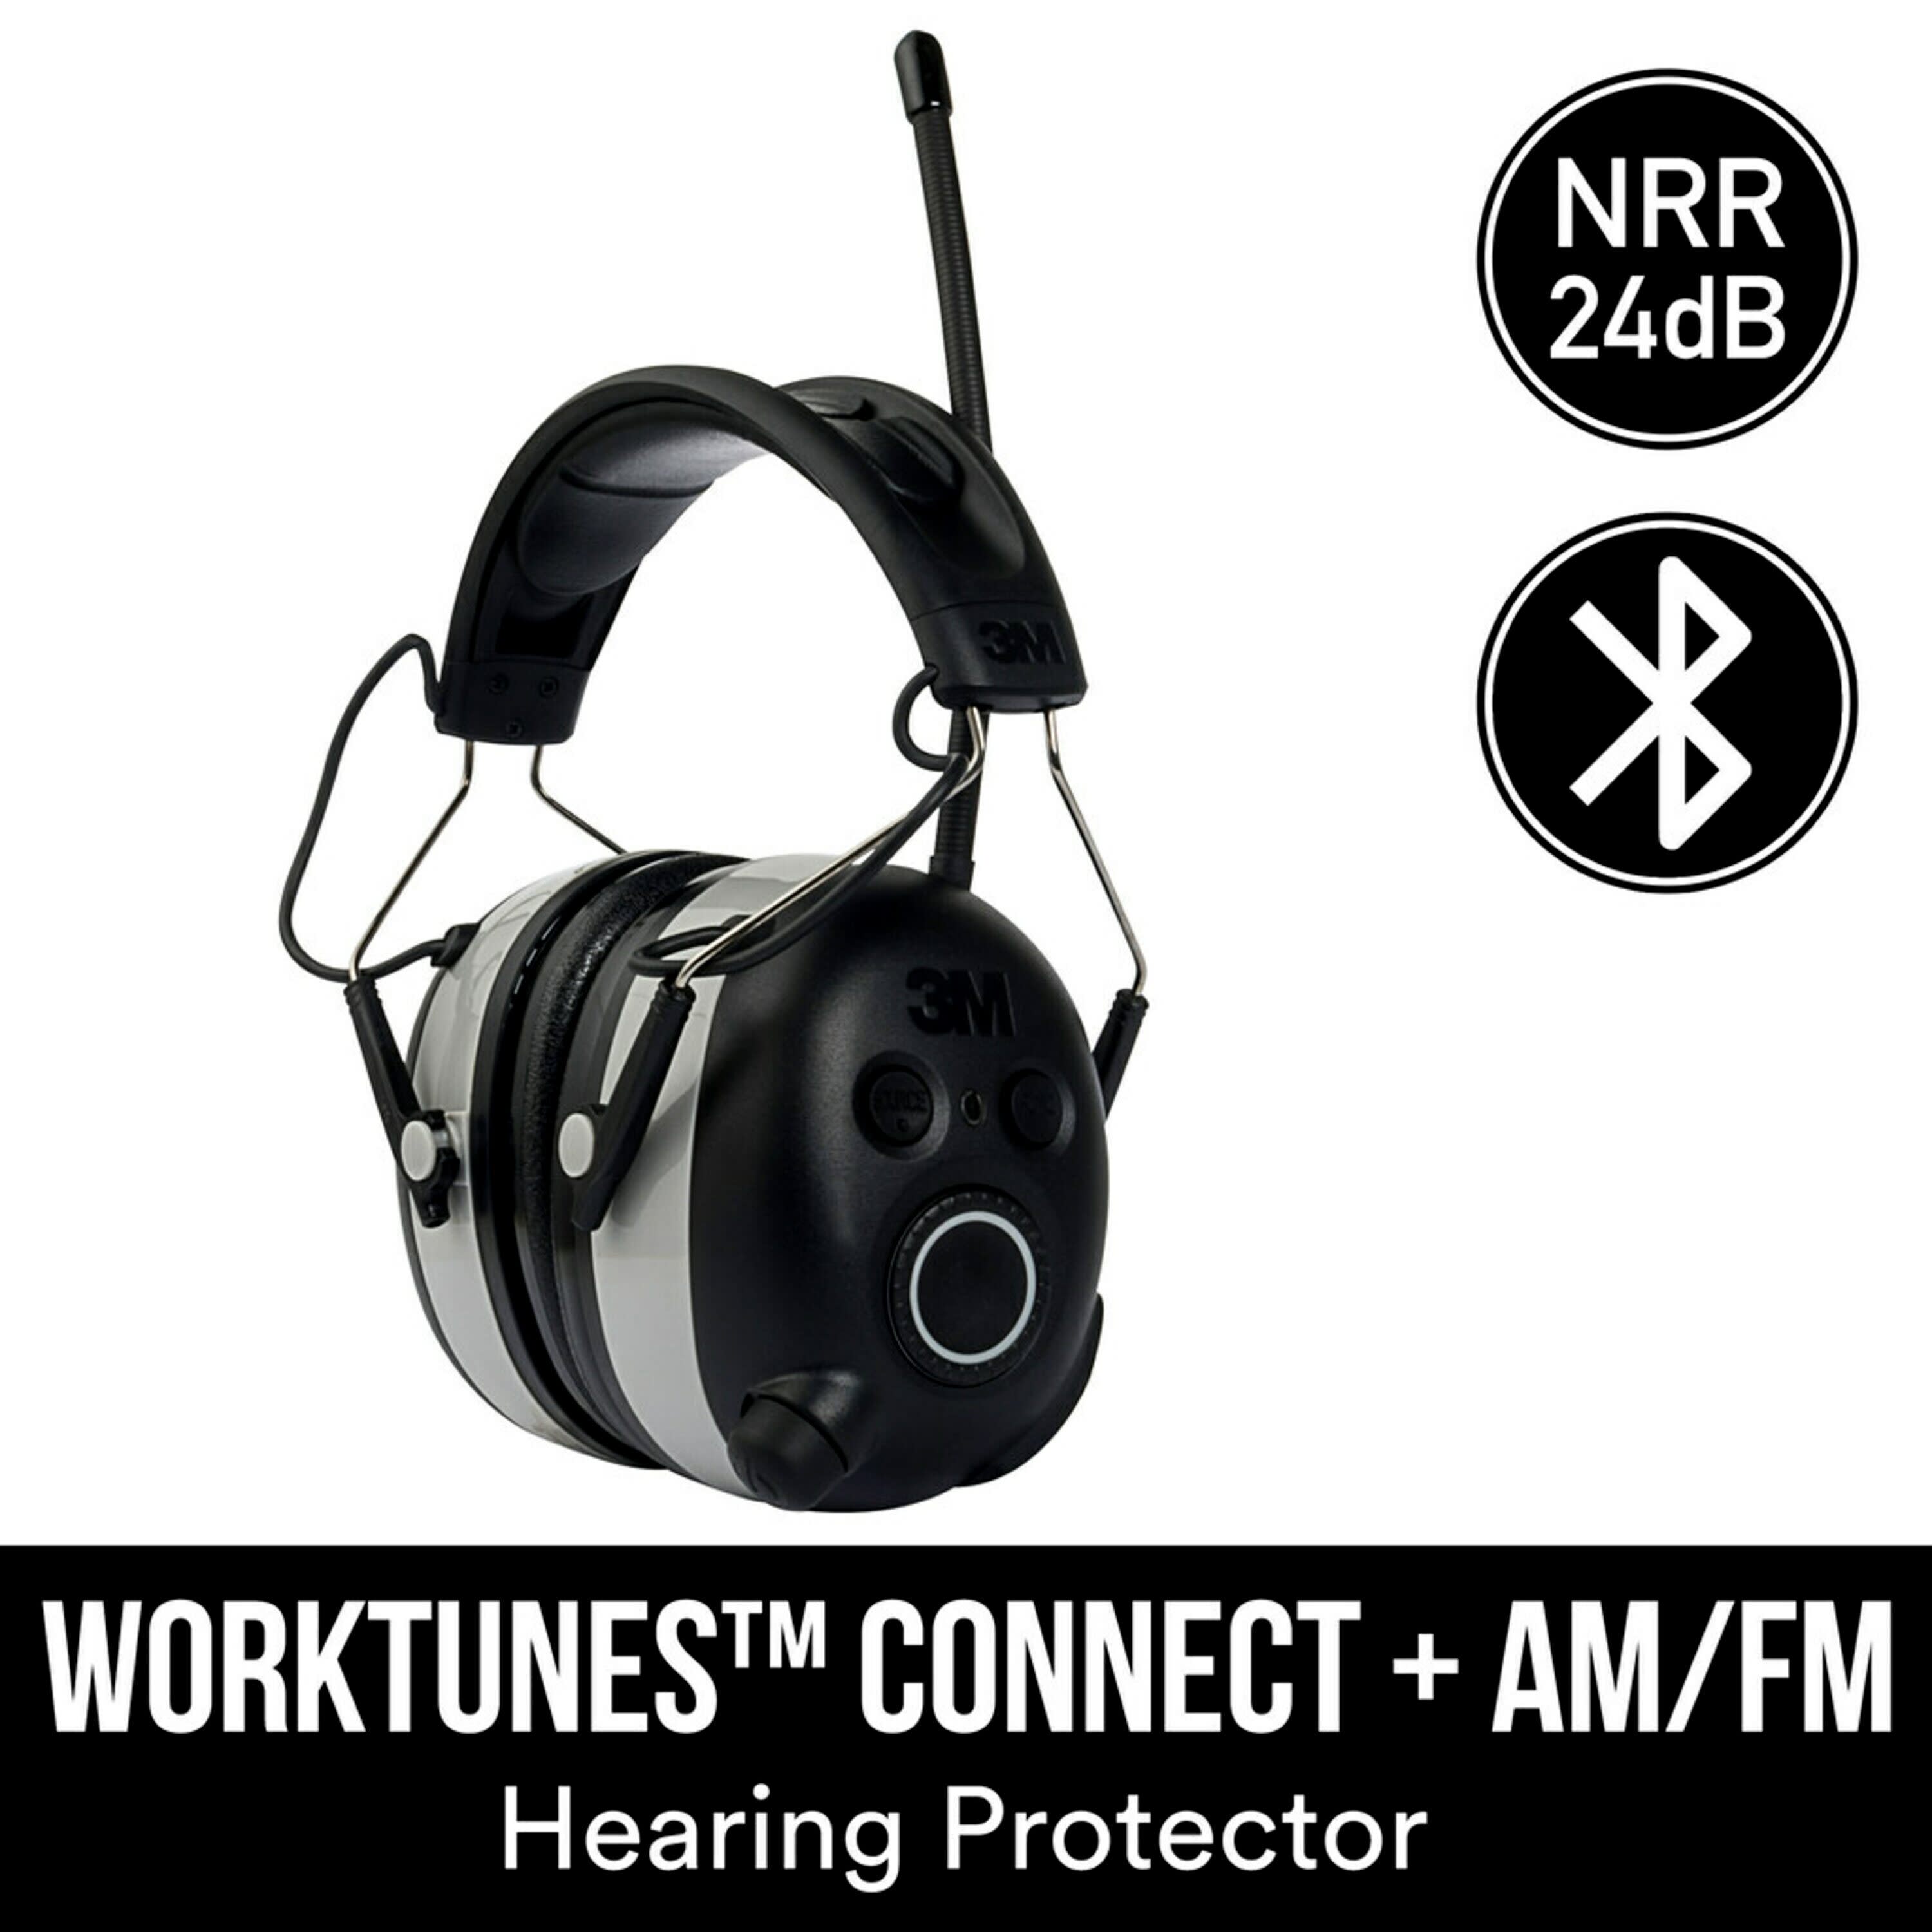 3M WorkTunes Connect + AM/FM Hearing Protection Earmuffs with AM